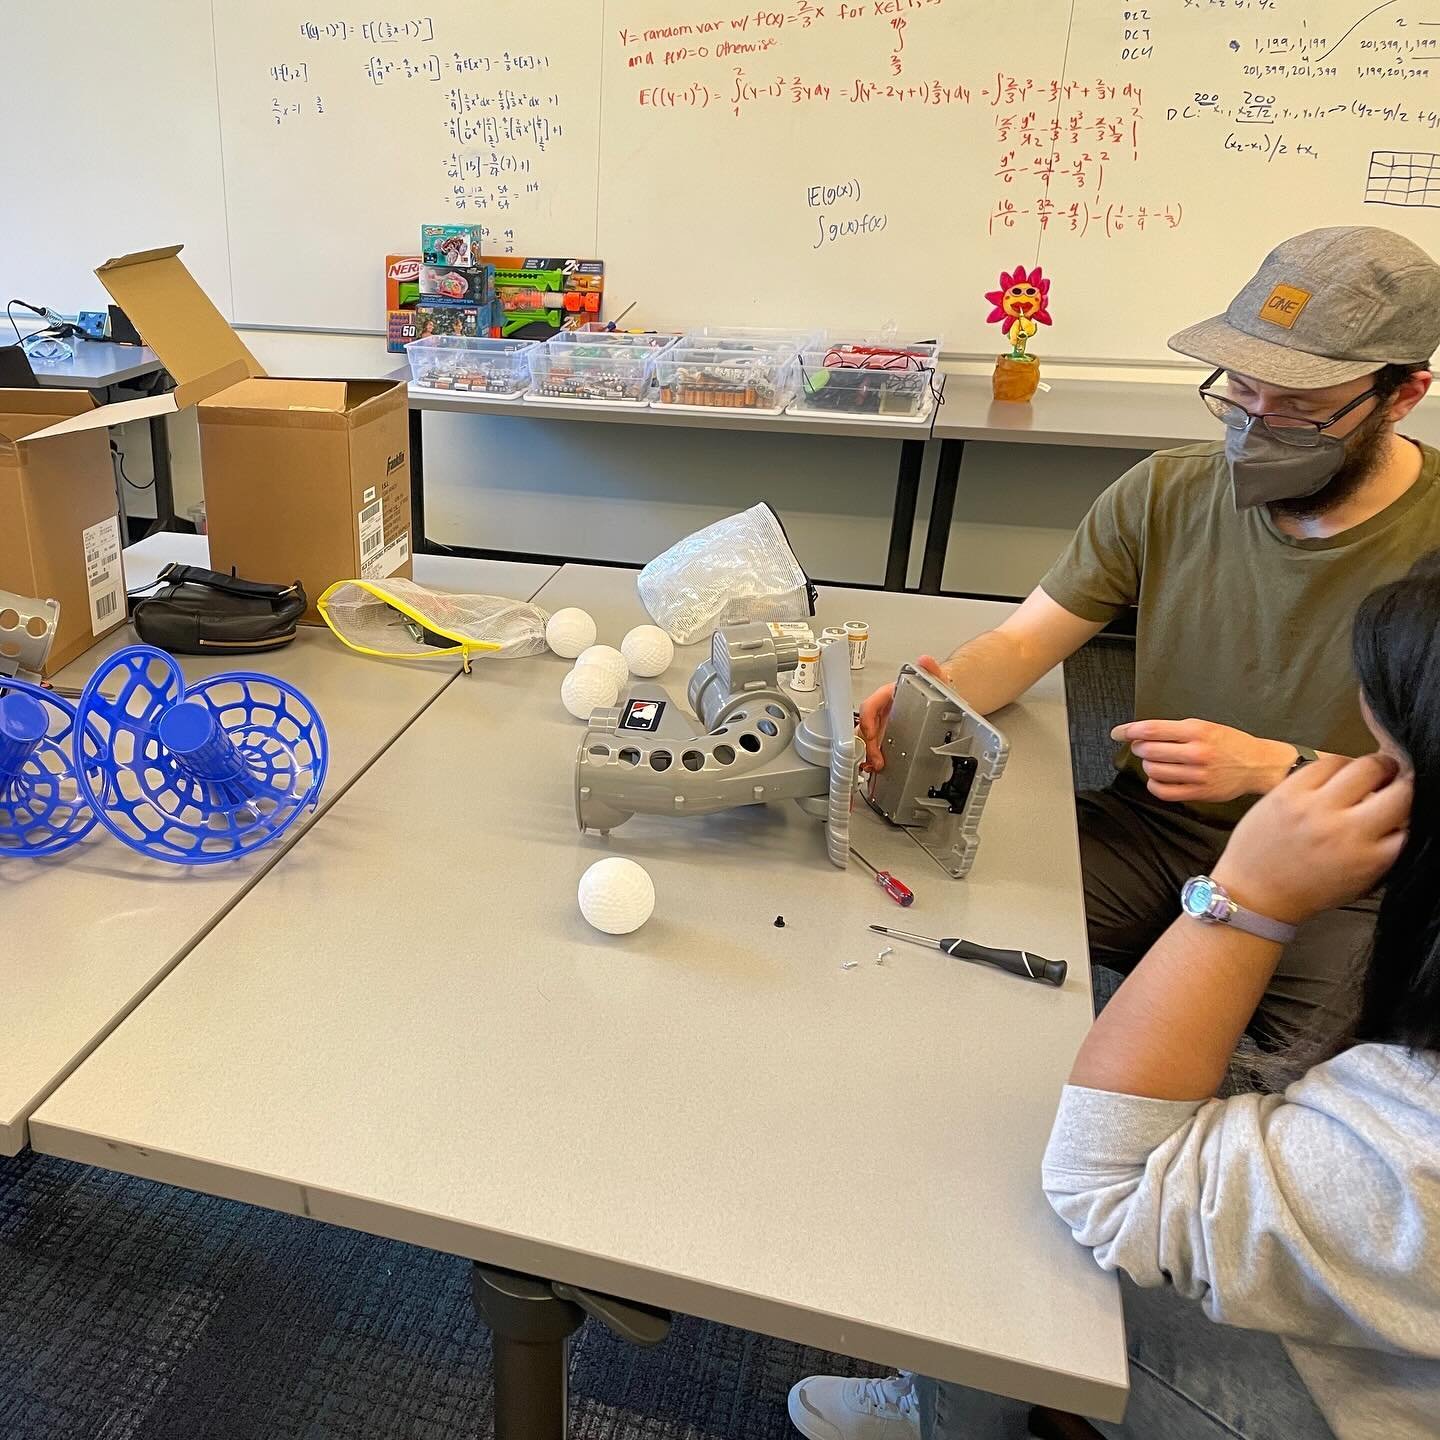 At last week&rsquo;s toy adaptation workshop attendees got to work on some exciting new toys including a tractor bubble machine, a Simon memory game, and two ball pitchers! We had tons of fun with the ball pitchers and hope to do more in the future. 